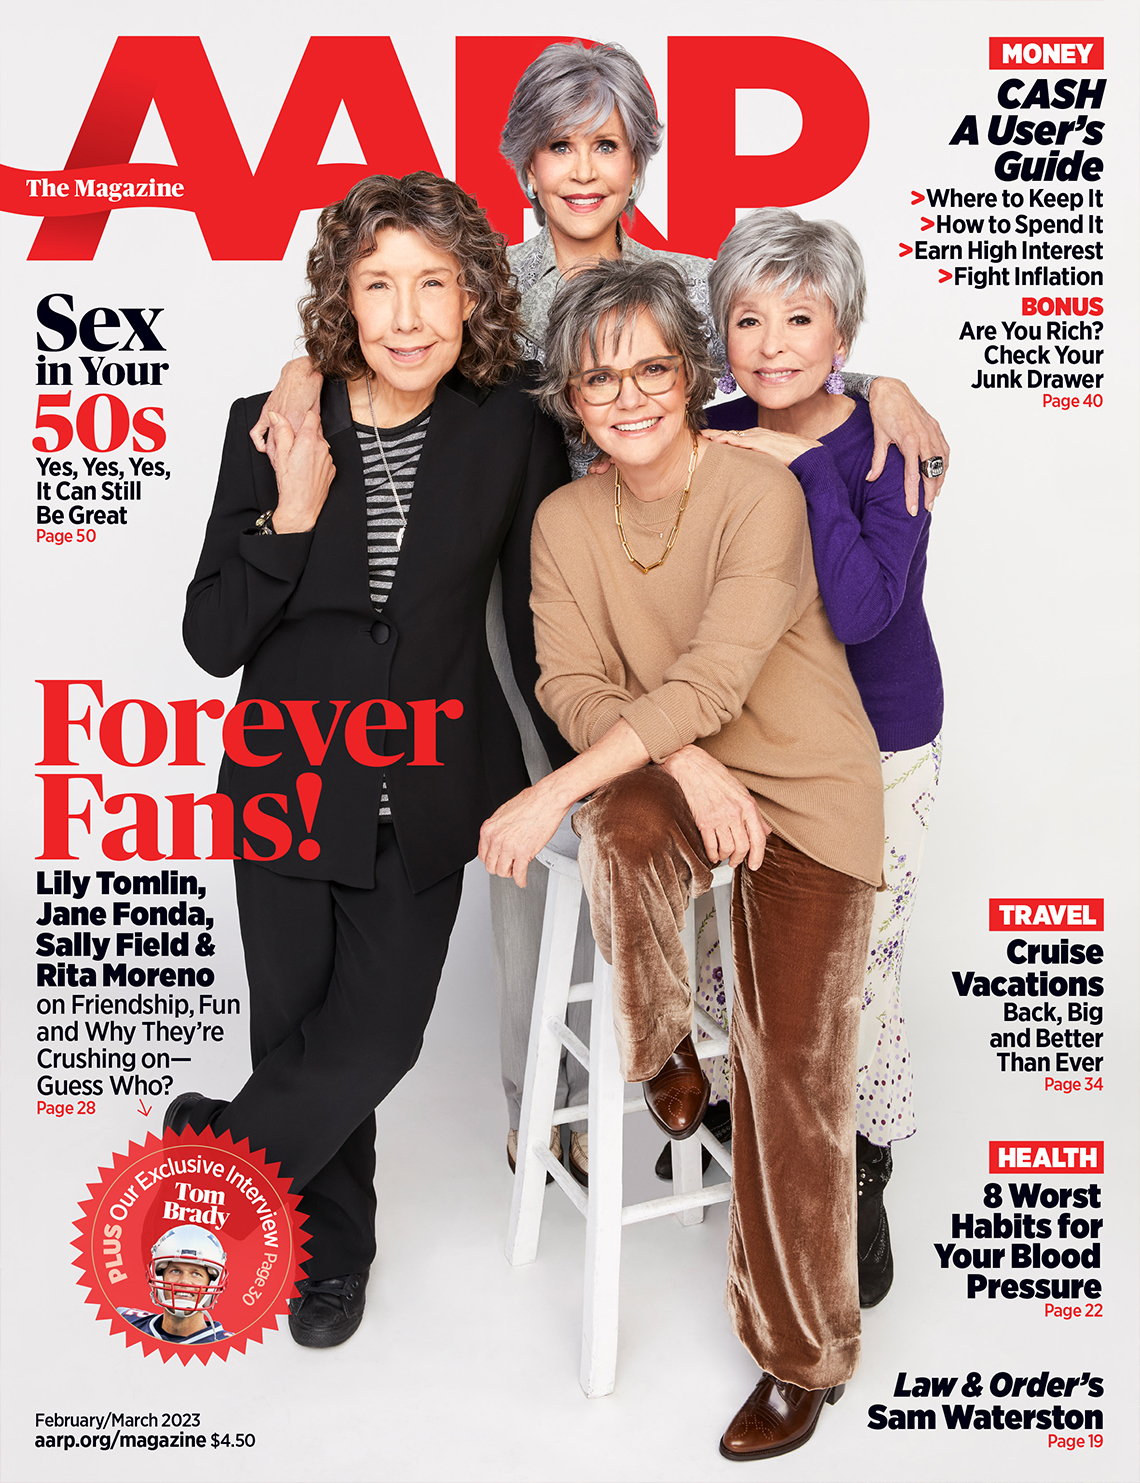 a a r p the magazine cover february / march 2023, featuring lily tomlin, jane fonda, rita moreno and sally field